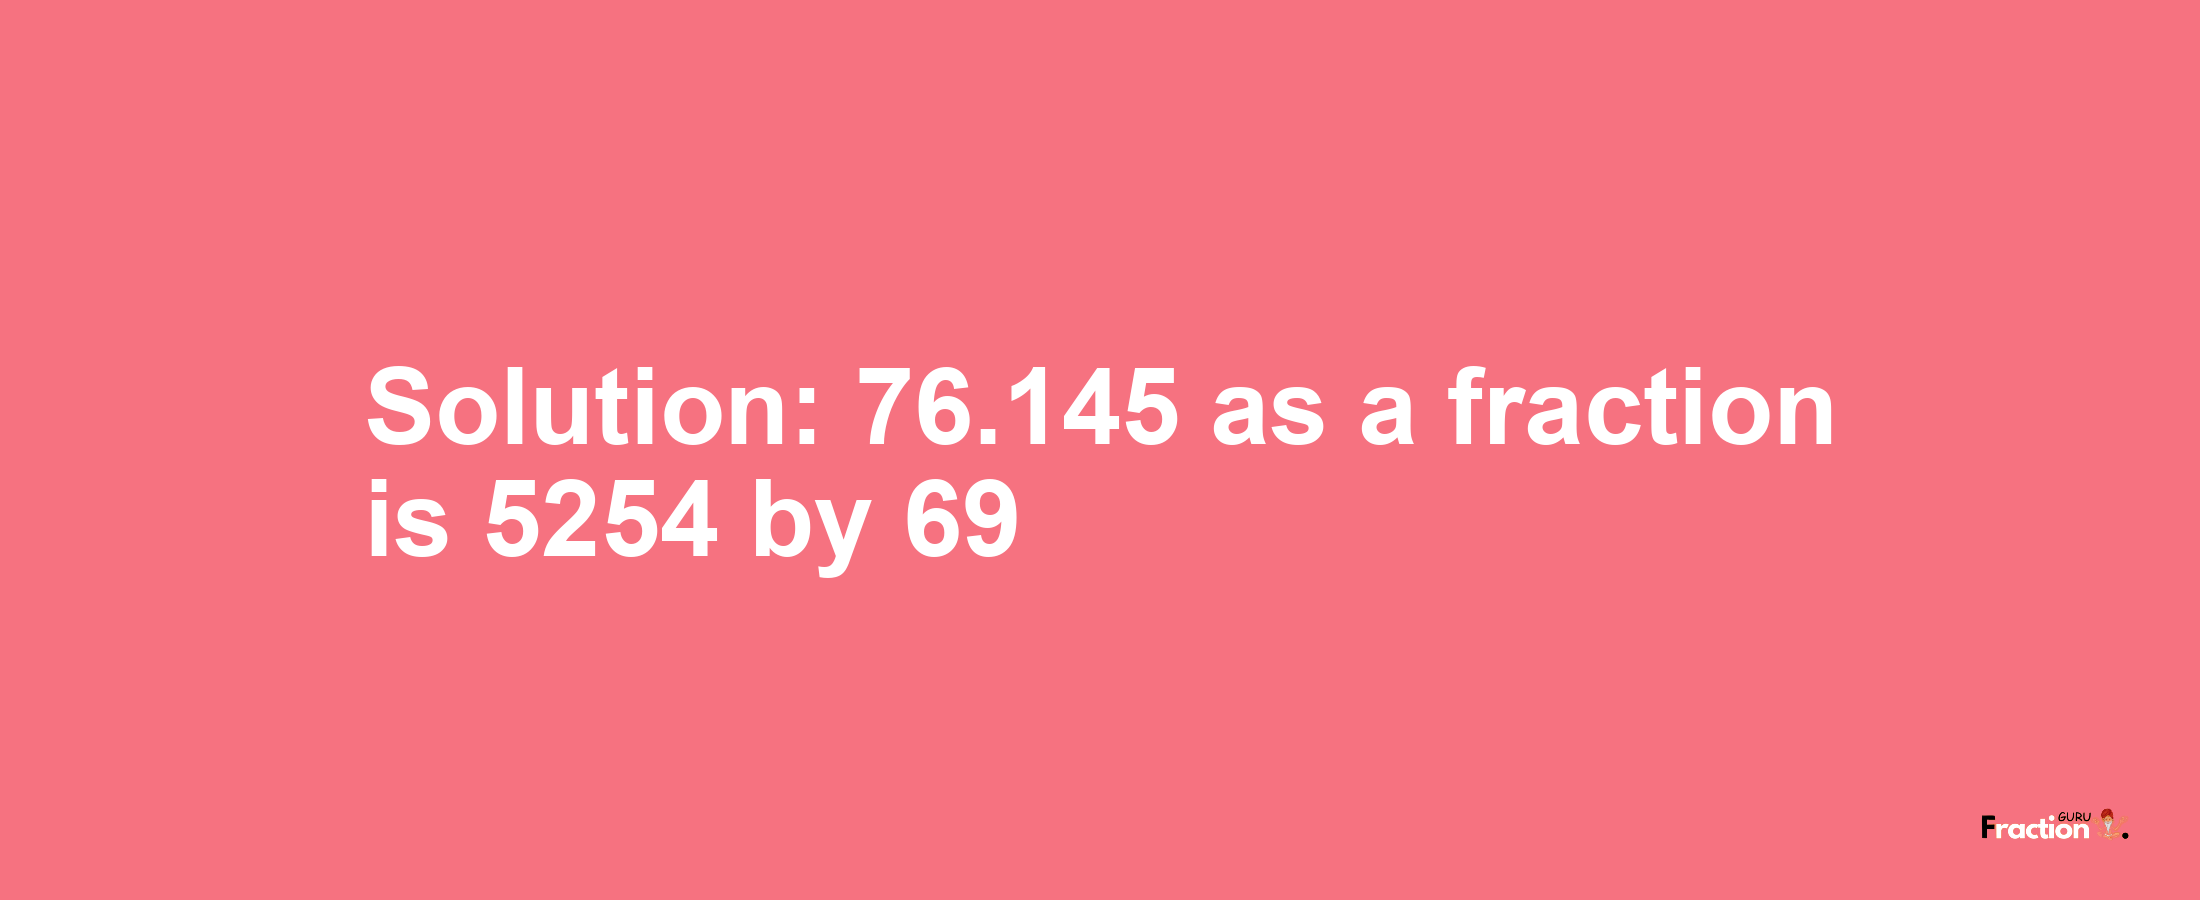 Solution:76.145 as a fraction is 5254/69